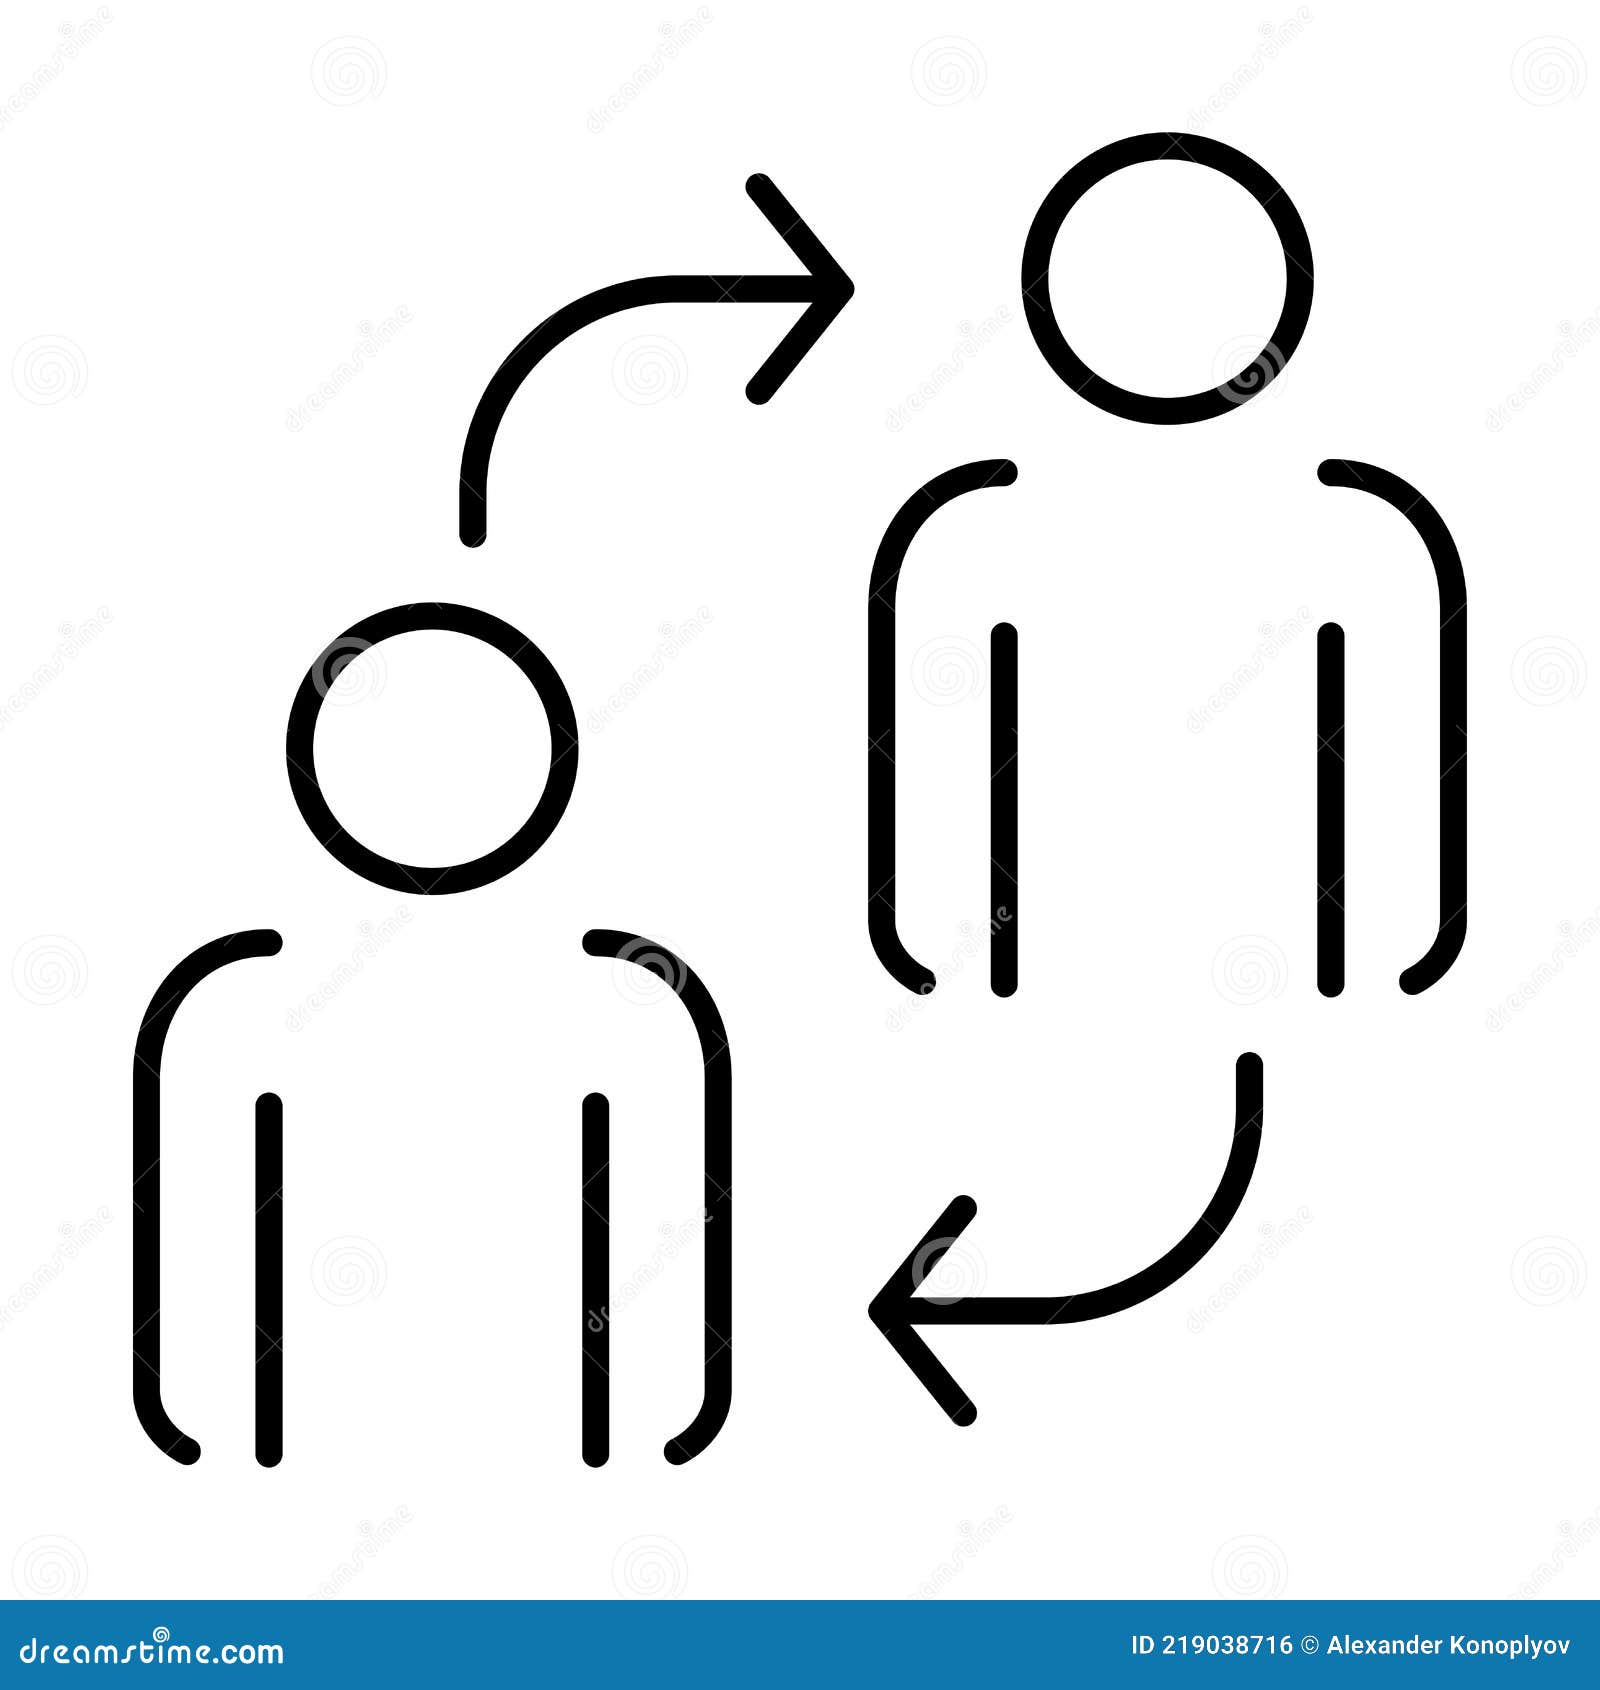 outline linear interaction icon   business communication, reorganization, teamwork